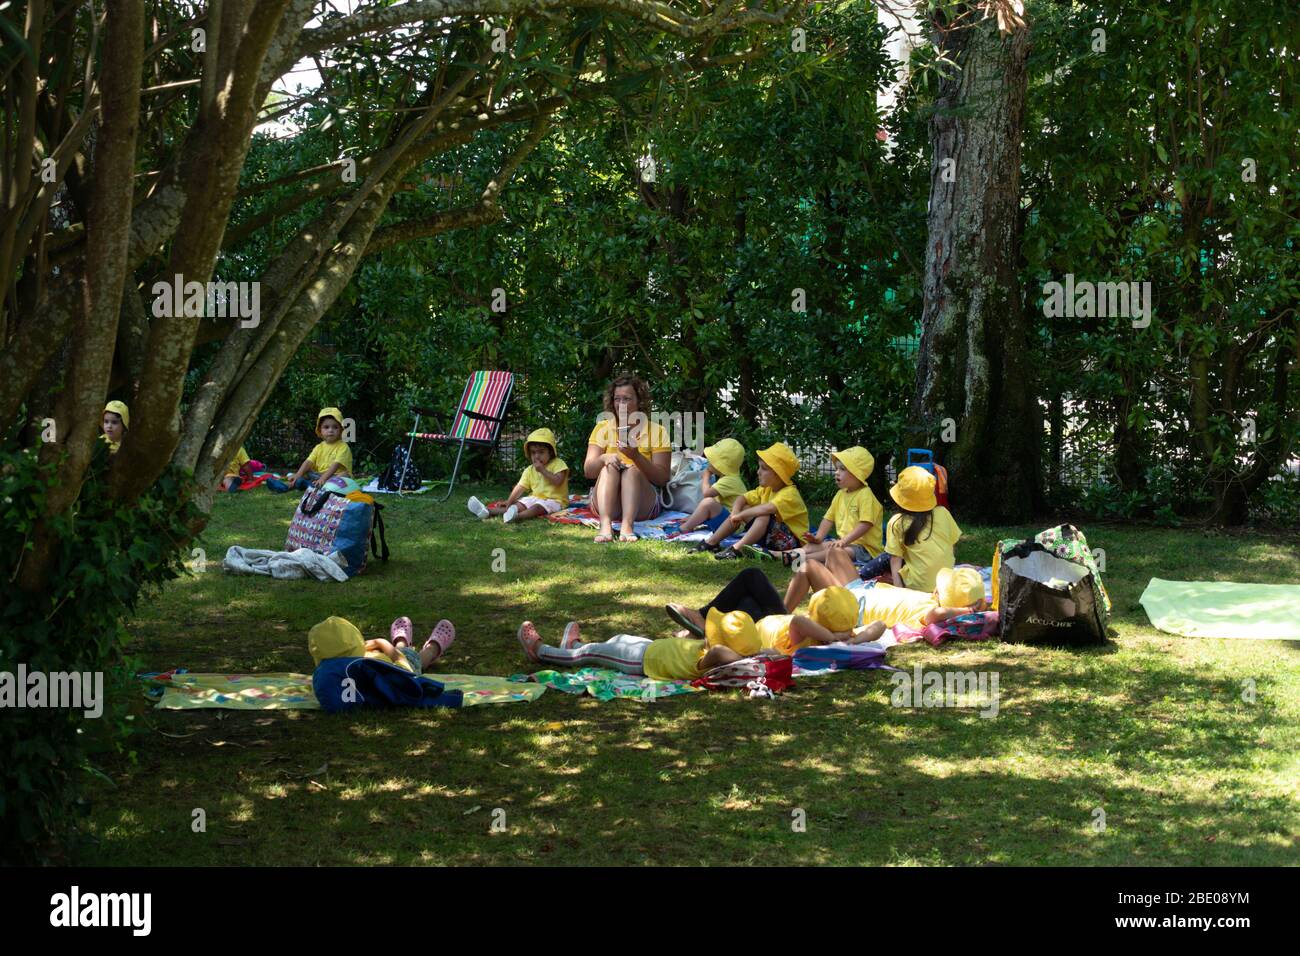 Children sitting with yellow hats and tee shirts with teacher attending Childrens summer club in wooded pretty municipal garden in in Oeiras Portugal Stock Photo